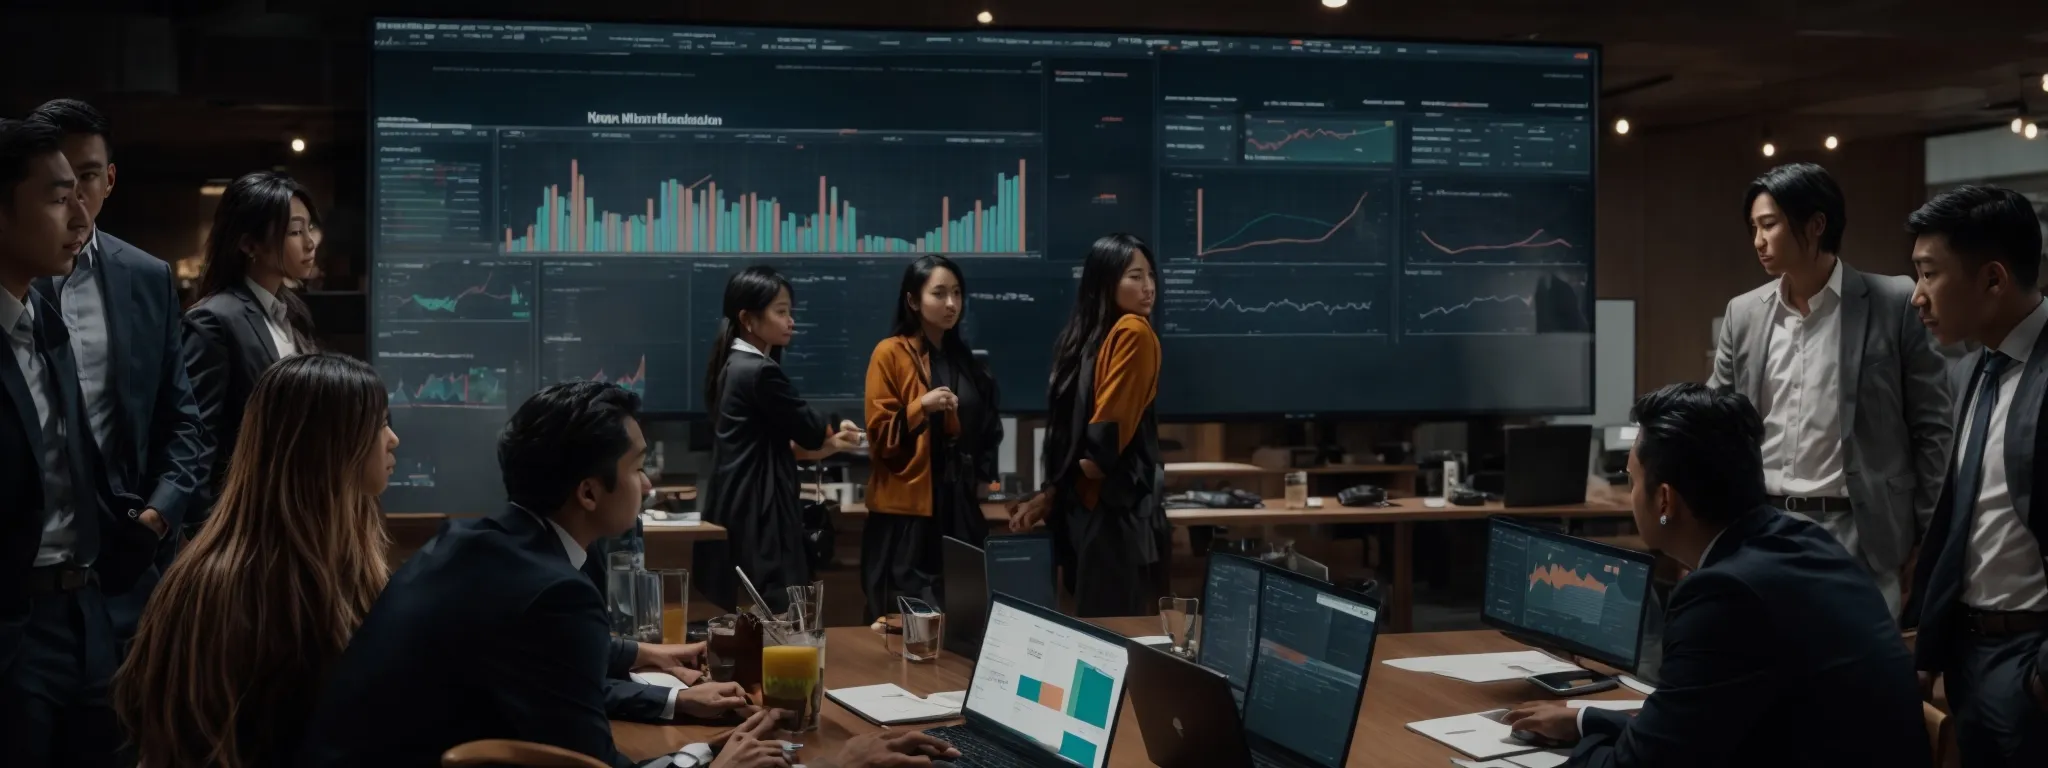 a diverse team gathers around a large screen displaying graphs and analytics, strategizing their next digital marketing move.